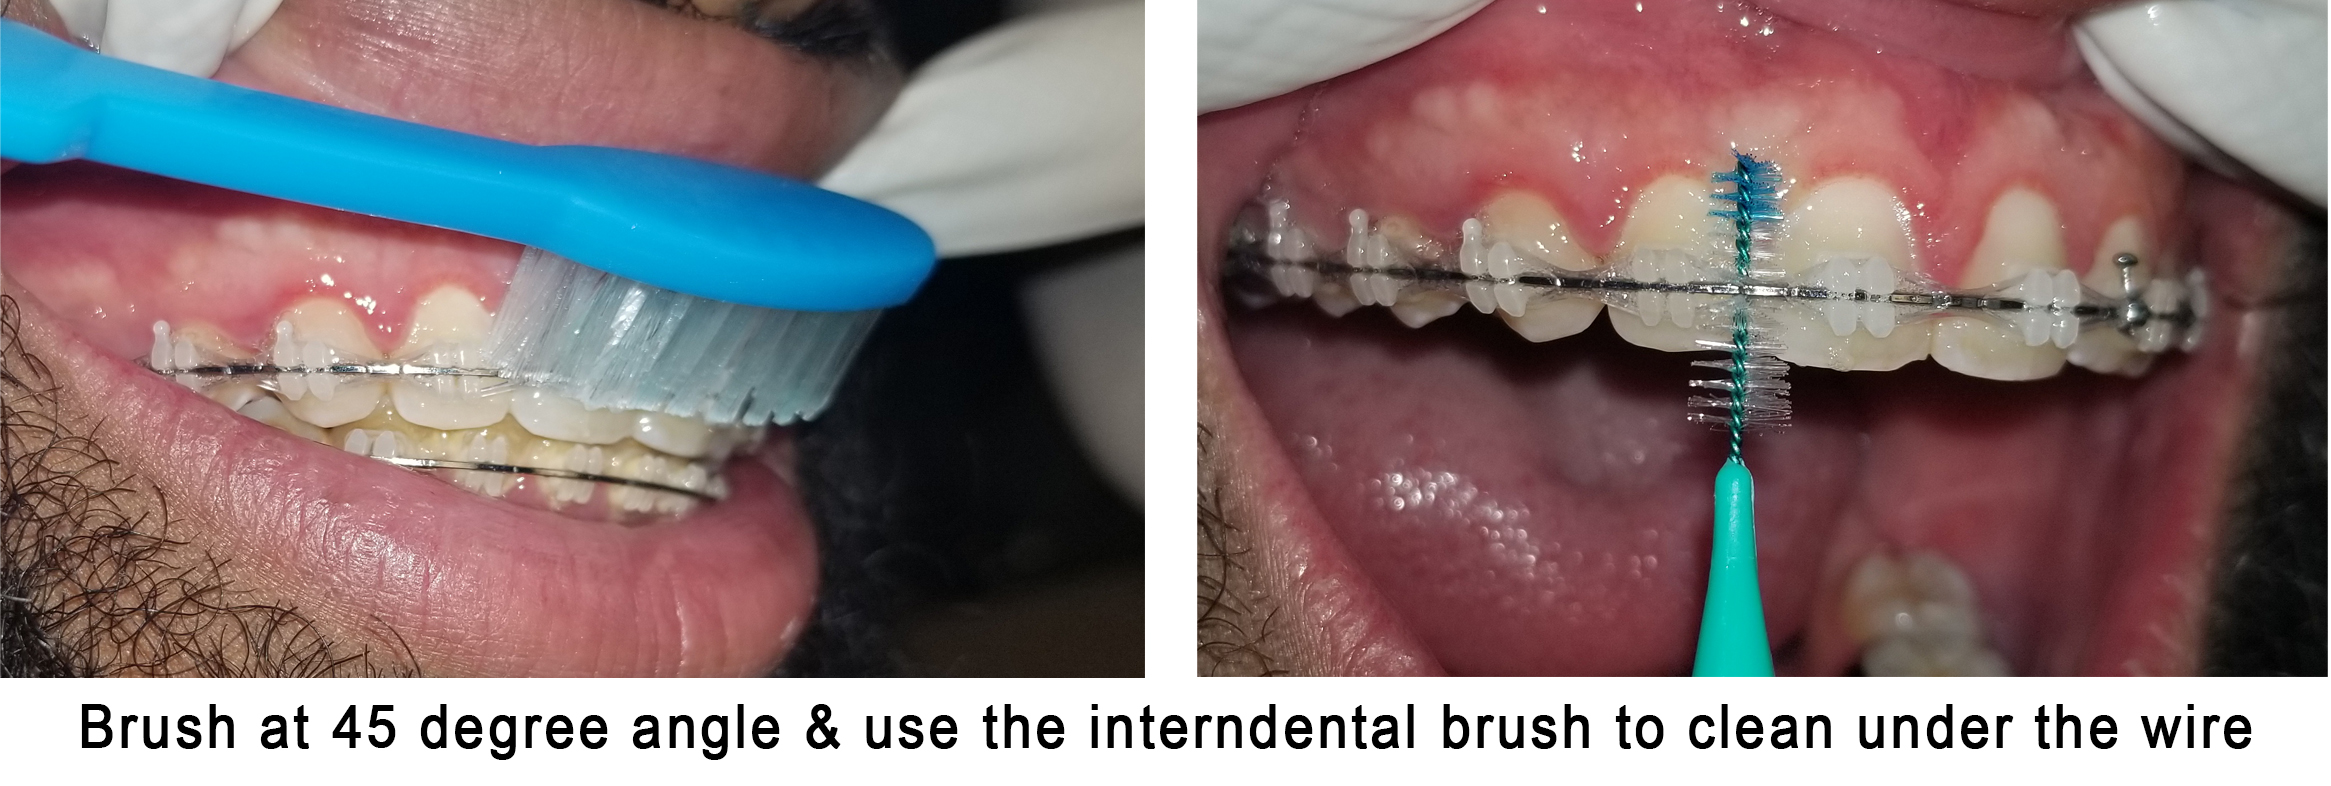 How%20to%20brush%20with%20braces2